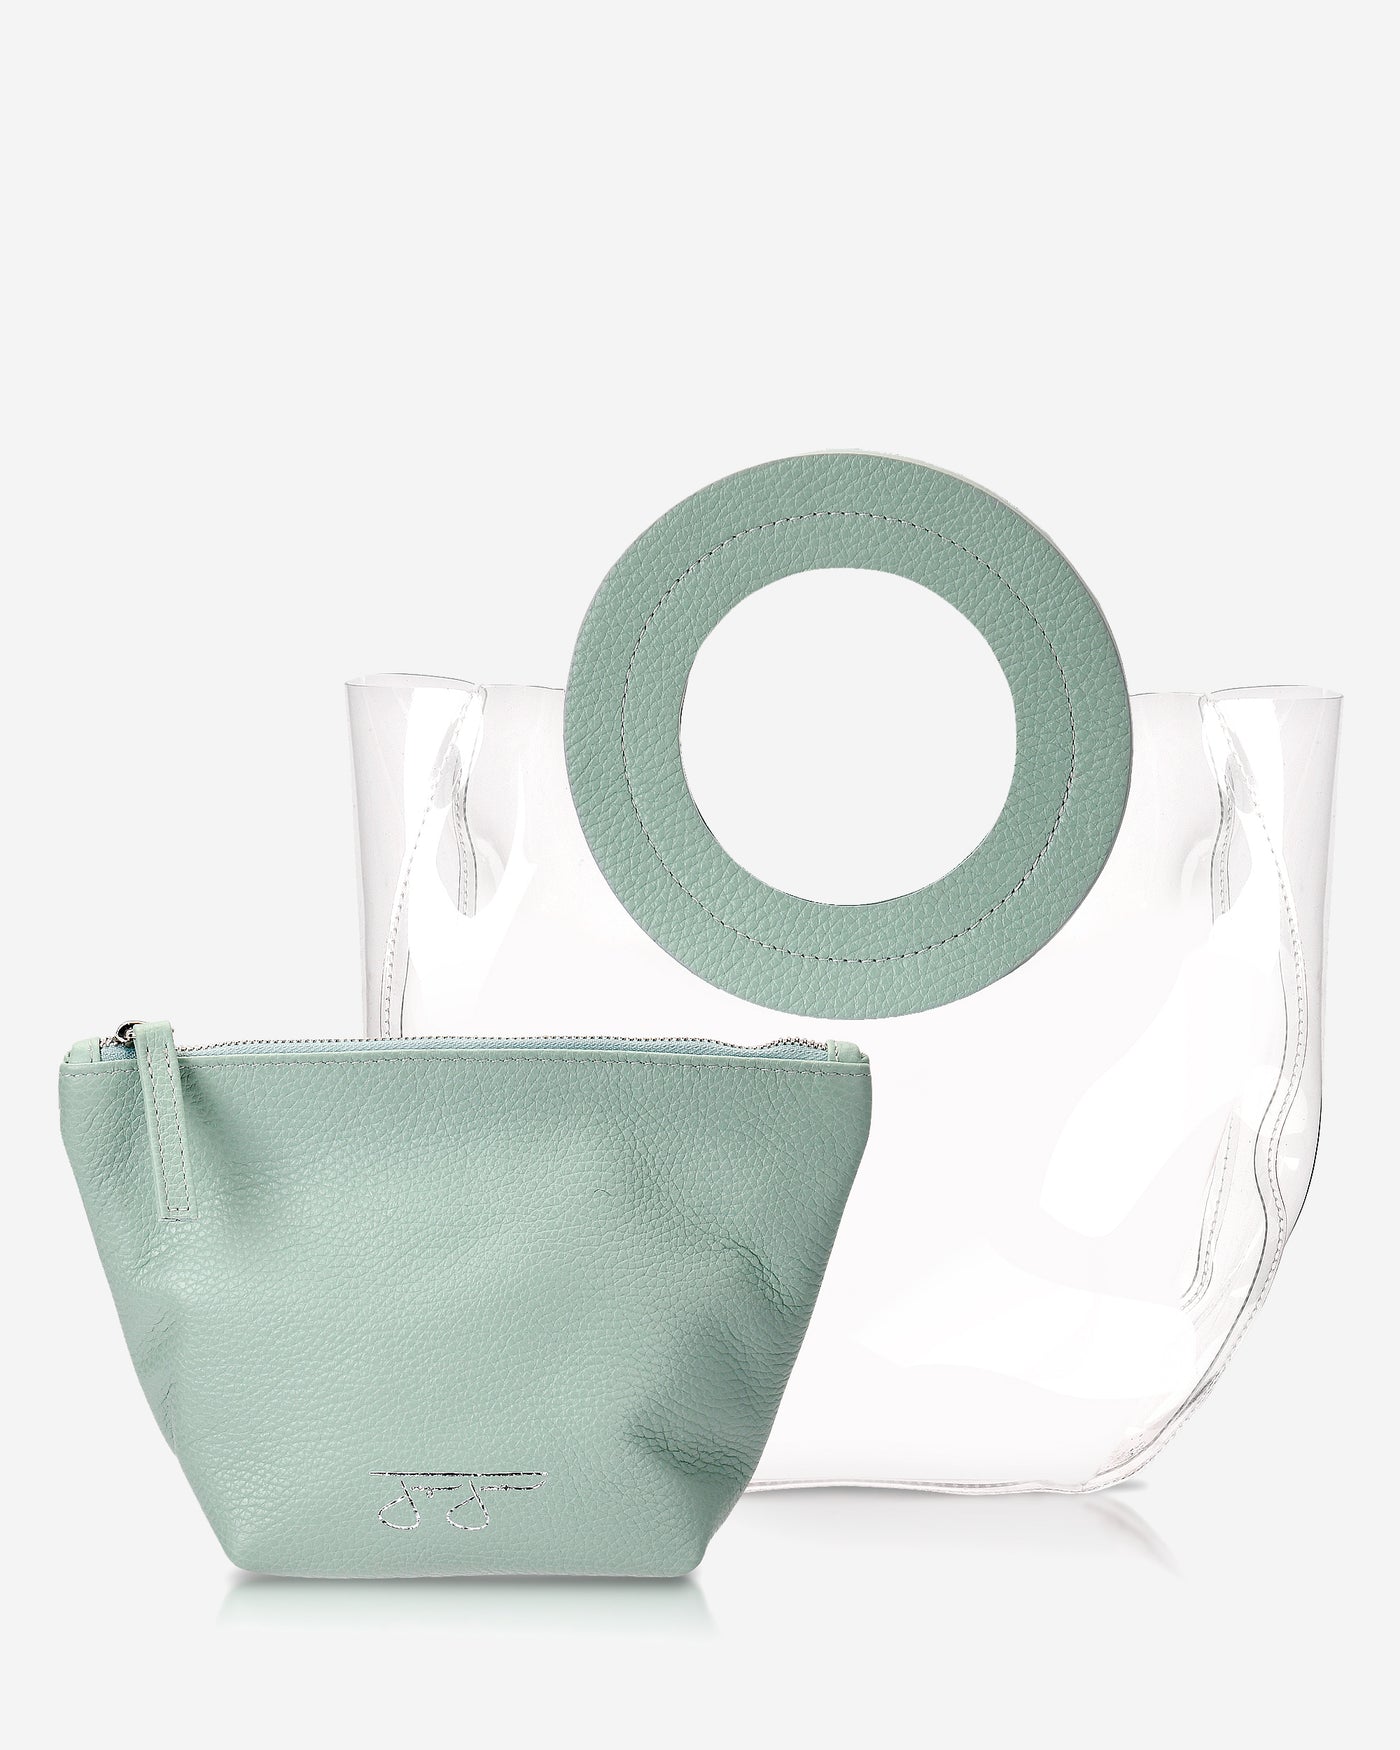 Lacey Bag - Celeste Lacey Clear Bag Joey James, The Label   